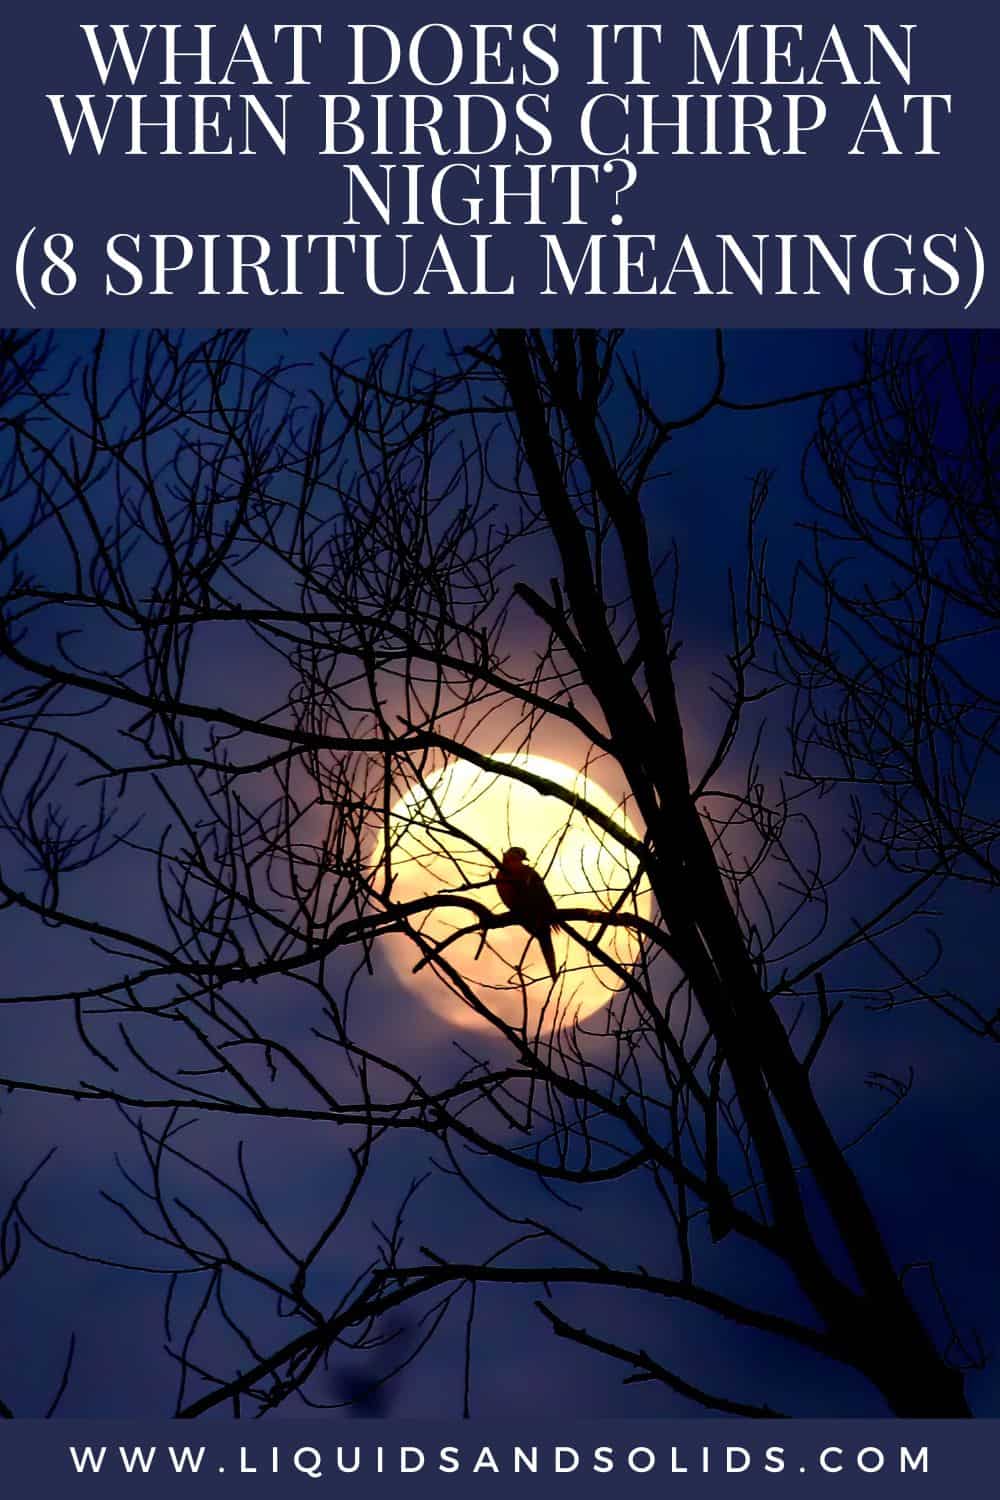 What Does It Mean When Birds Chirp At Night? (8 Spiritual Meanings)